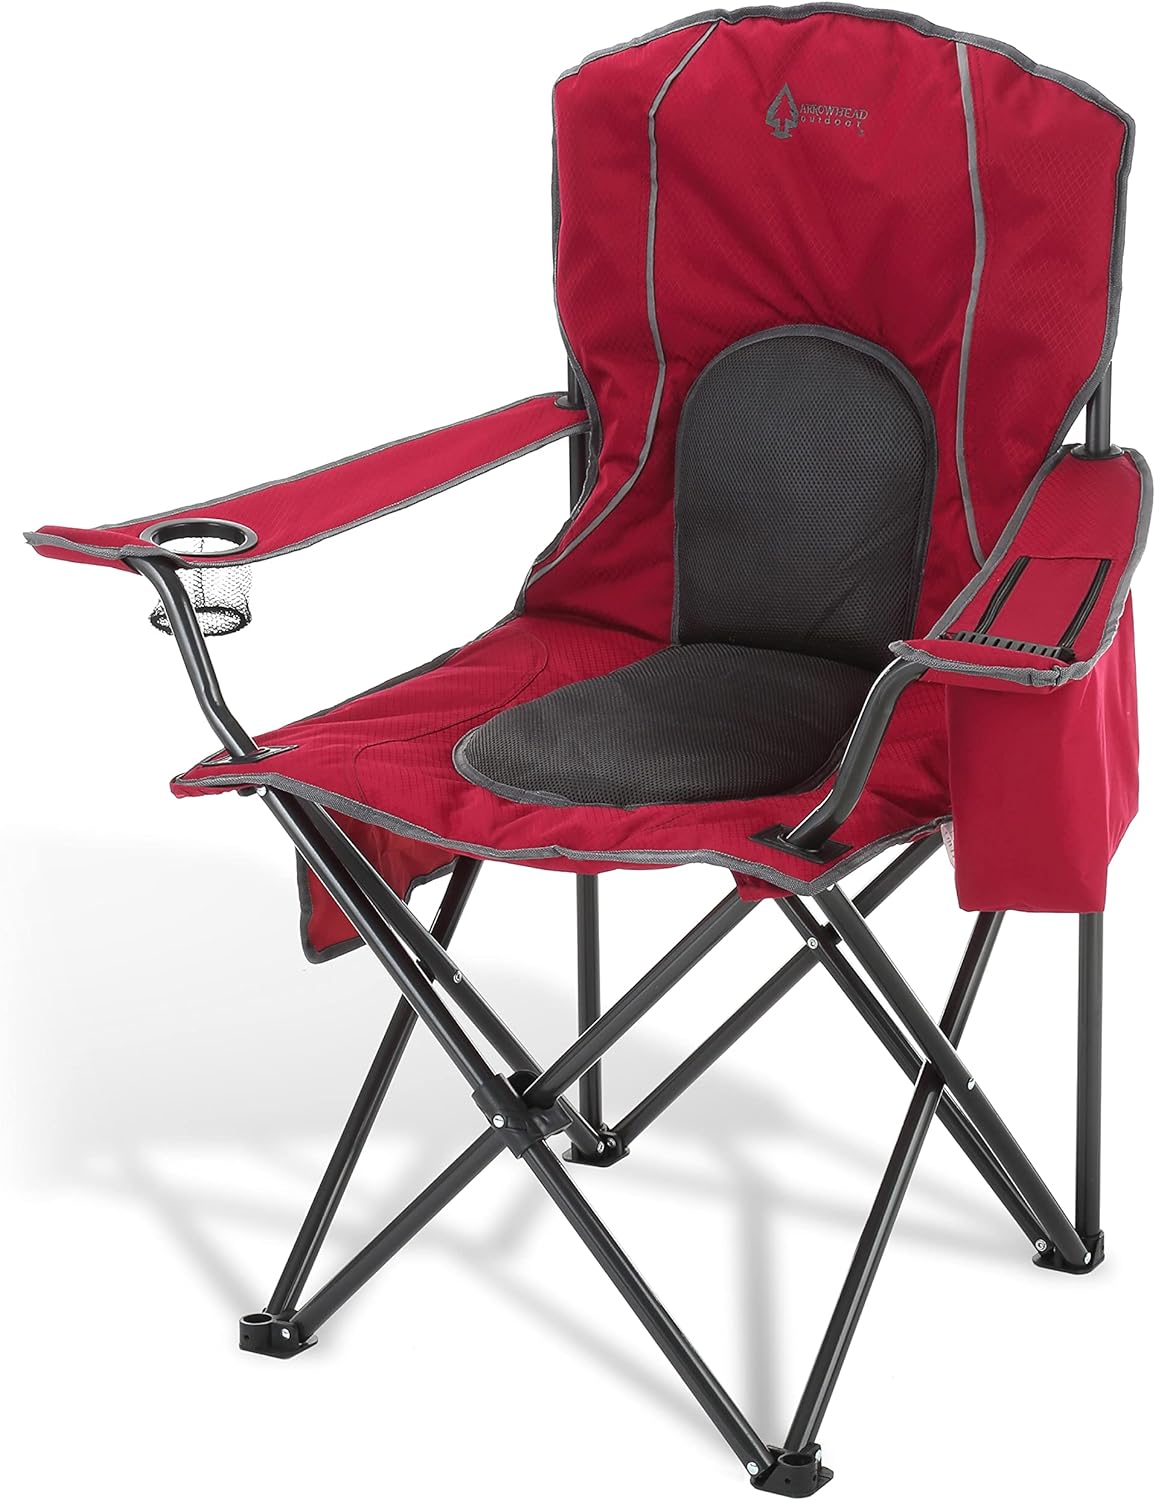 Portable Folding Camping Quad Chair w/ 4-Can Cooler